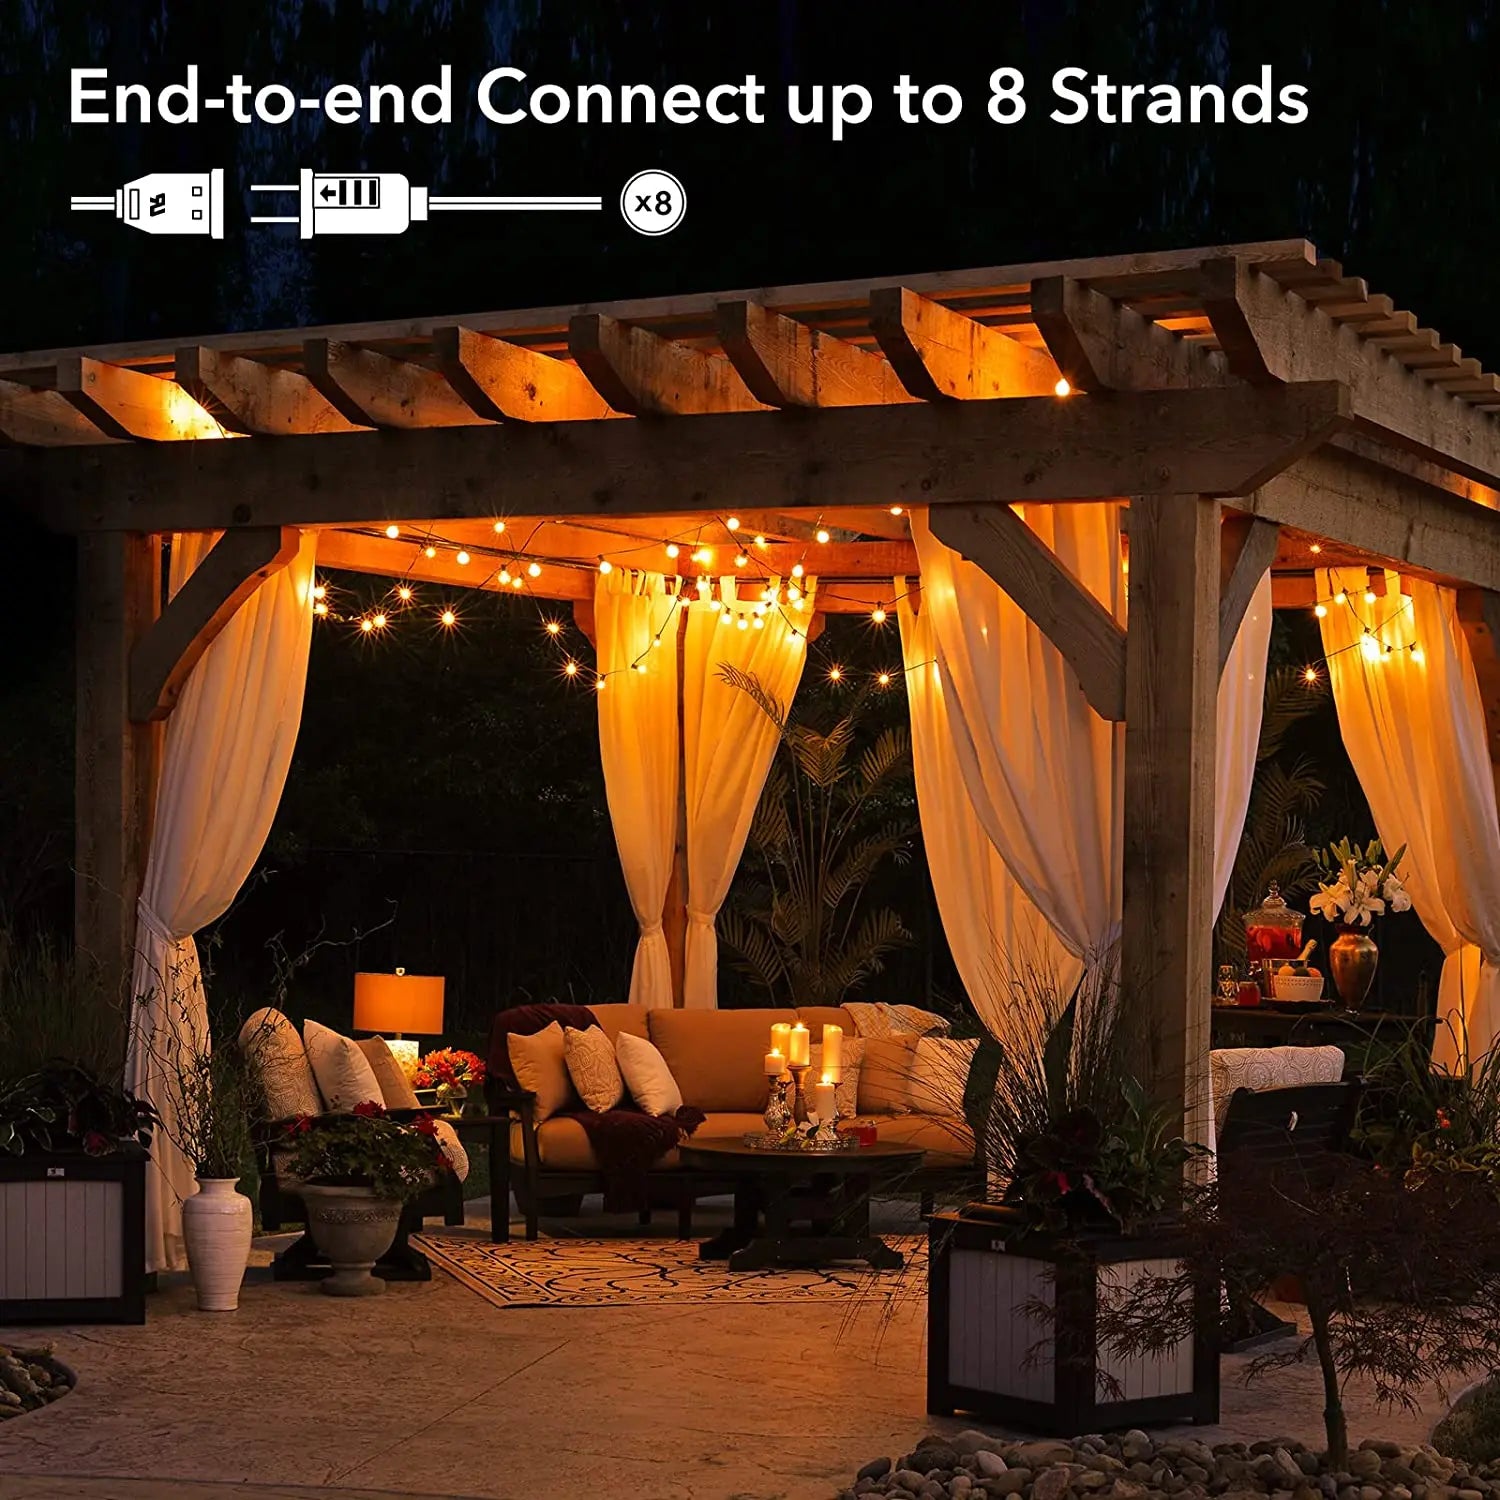 LED G40 Globe String Light, Intertwine multiple strands for a unified appearance, connecting up to 8 ends seamlessly.